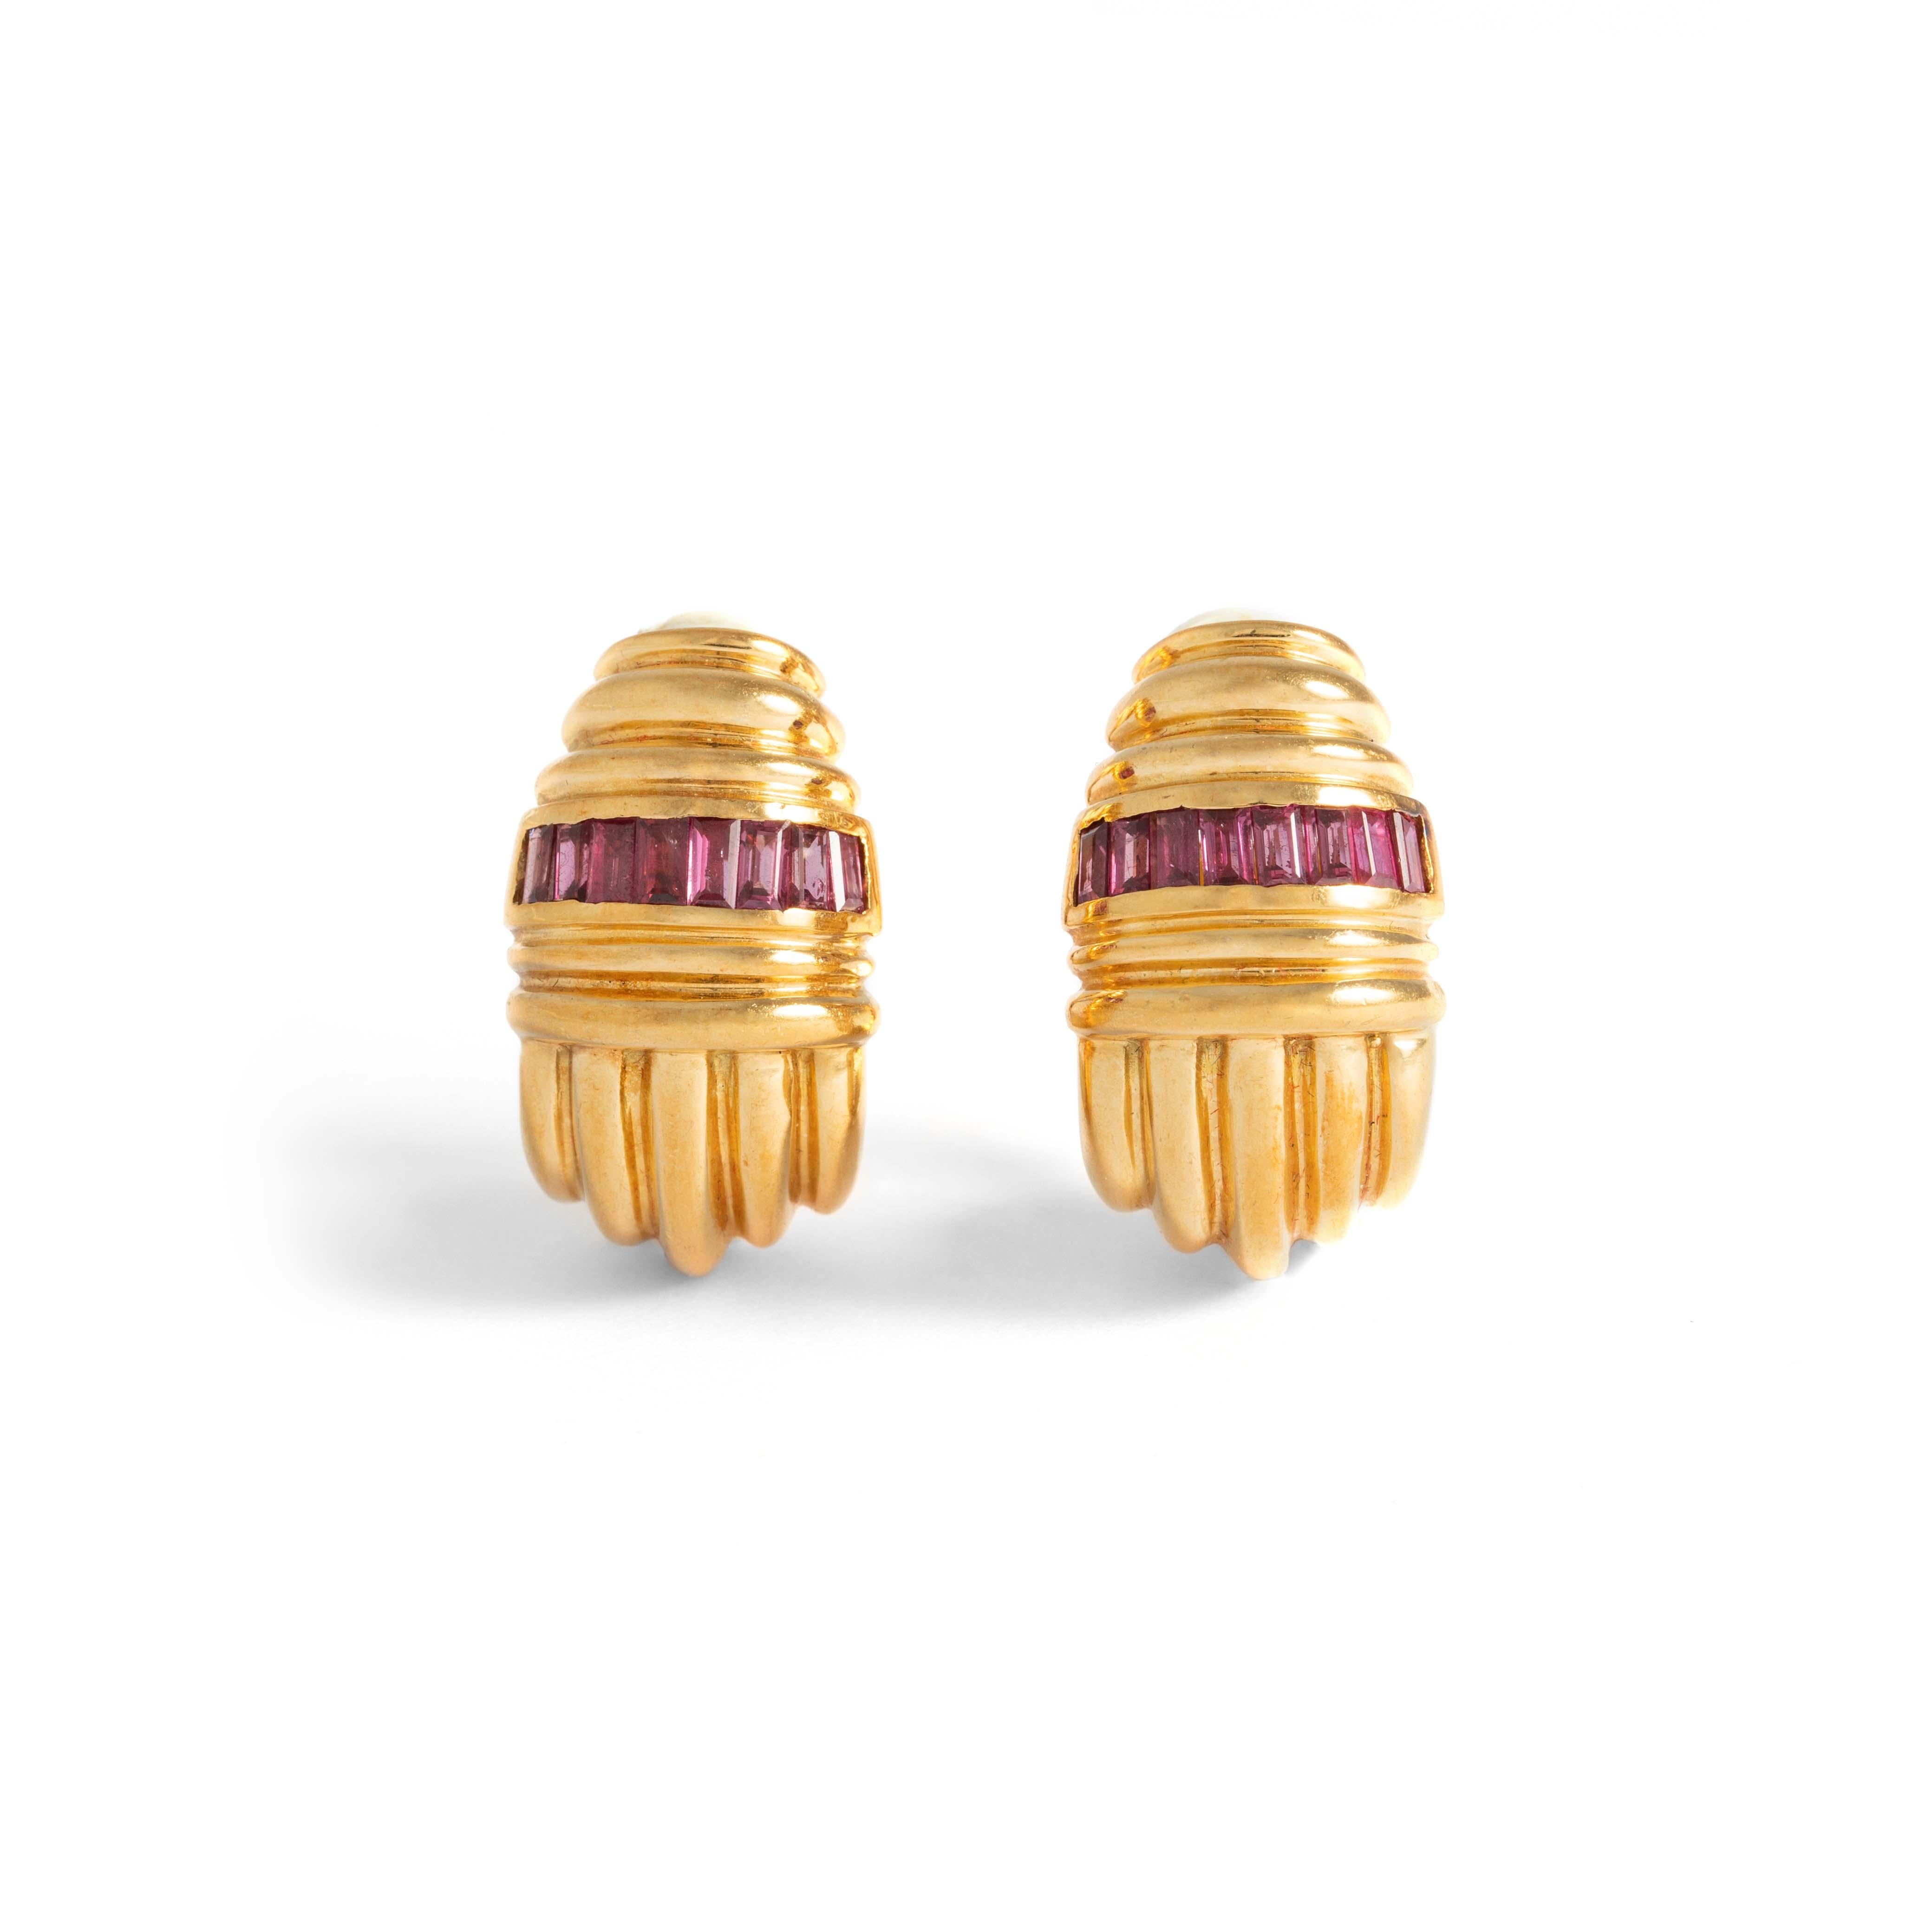 Pair of 18K yellow gold earrings respectively set with calibrated red stones.
Dimensions: 
2.80 centimeters x 1.50 centimeters.
Gross weight: 30.92 grams.